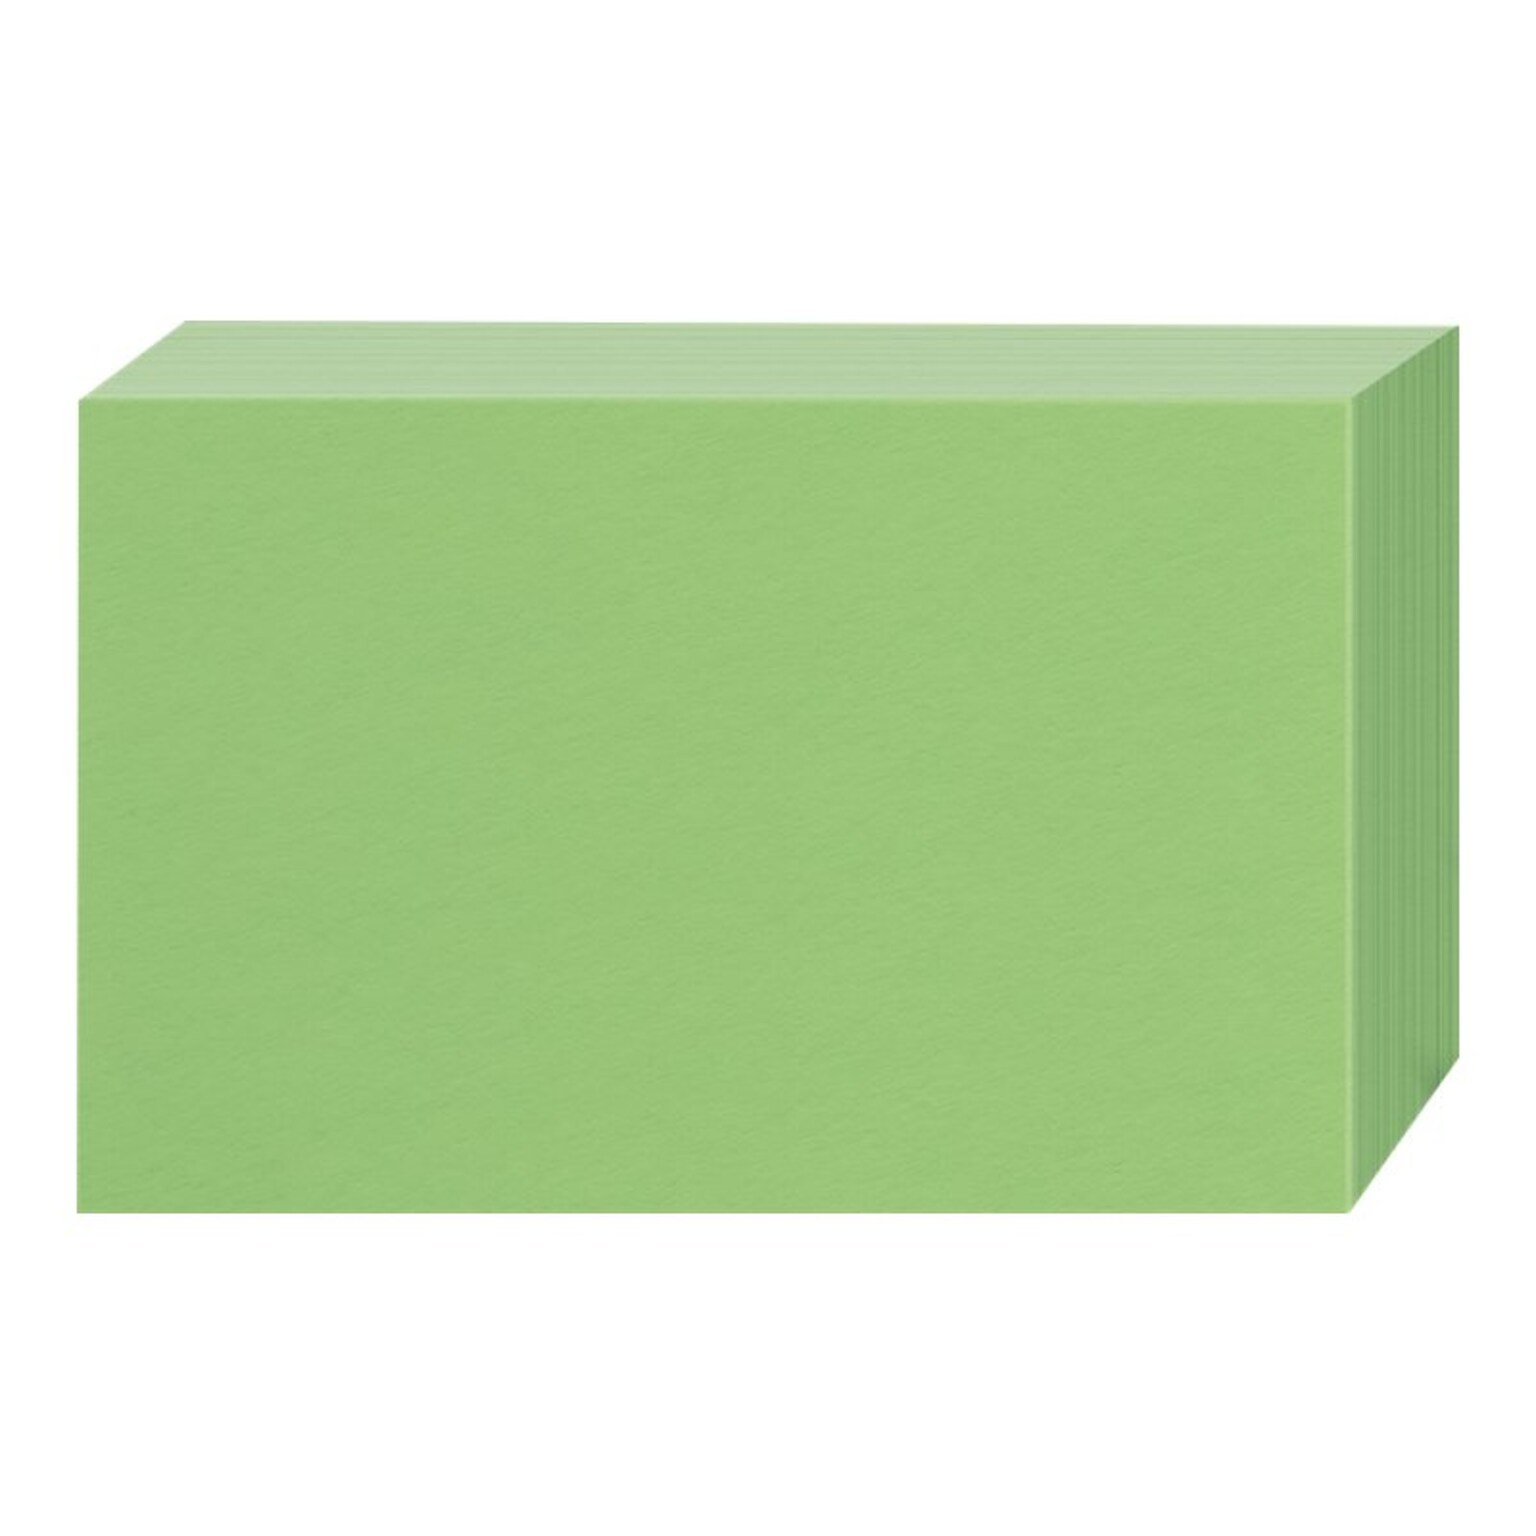 Oxford 3 x 5 Index Cards, Blank, Green, 100/Pack (7320GRE)